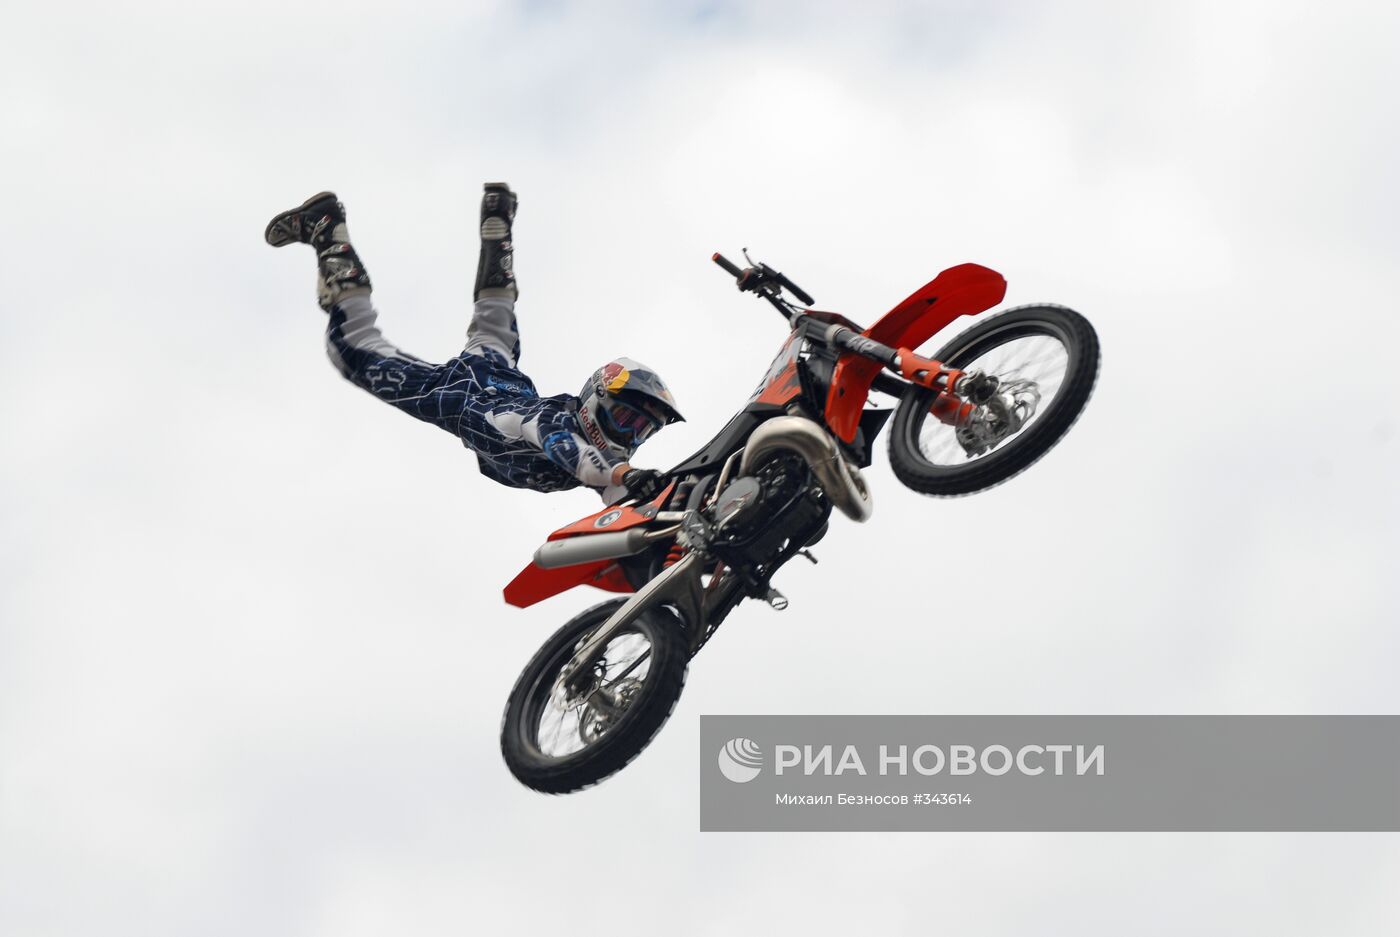 Фристайл мотокросс шоу Red Bull X-Fighters Exhibition